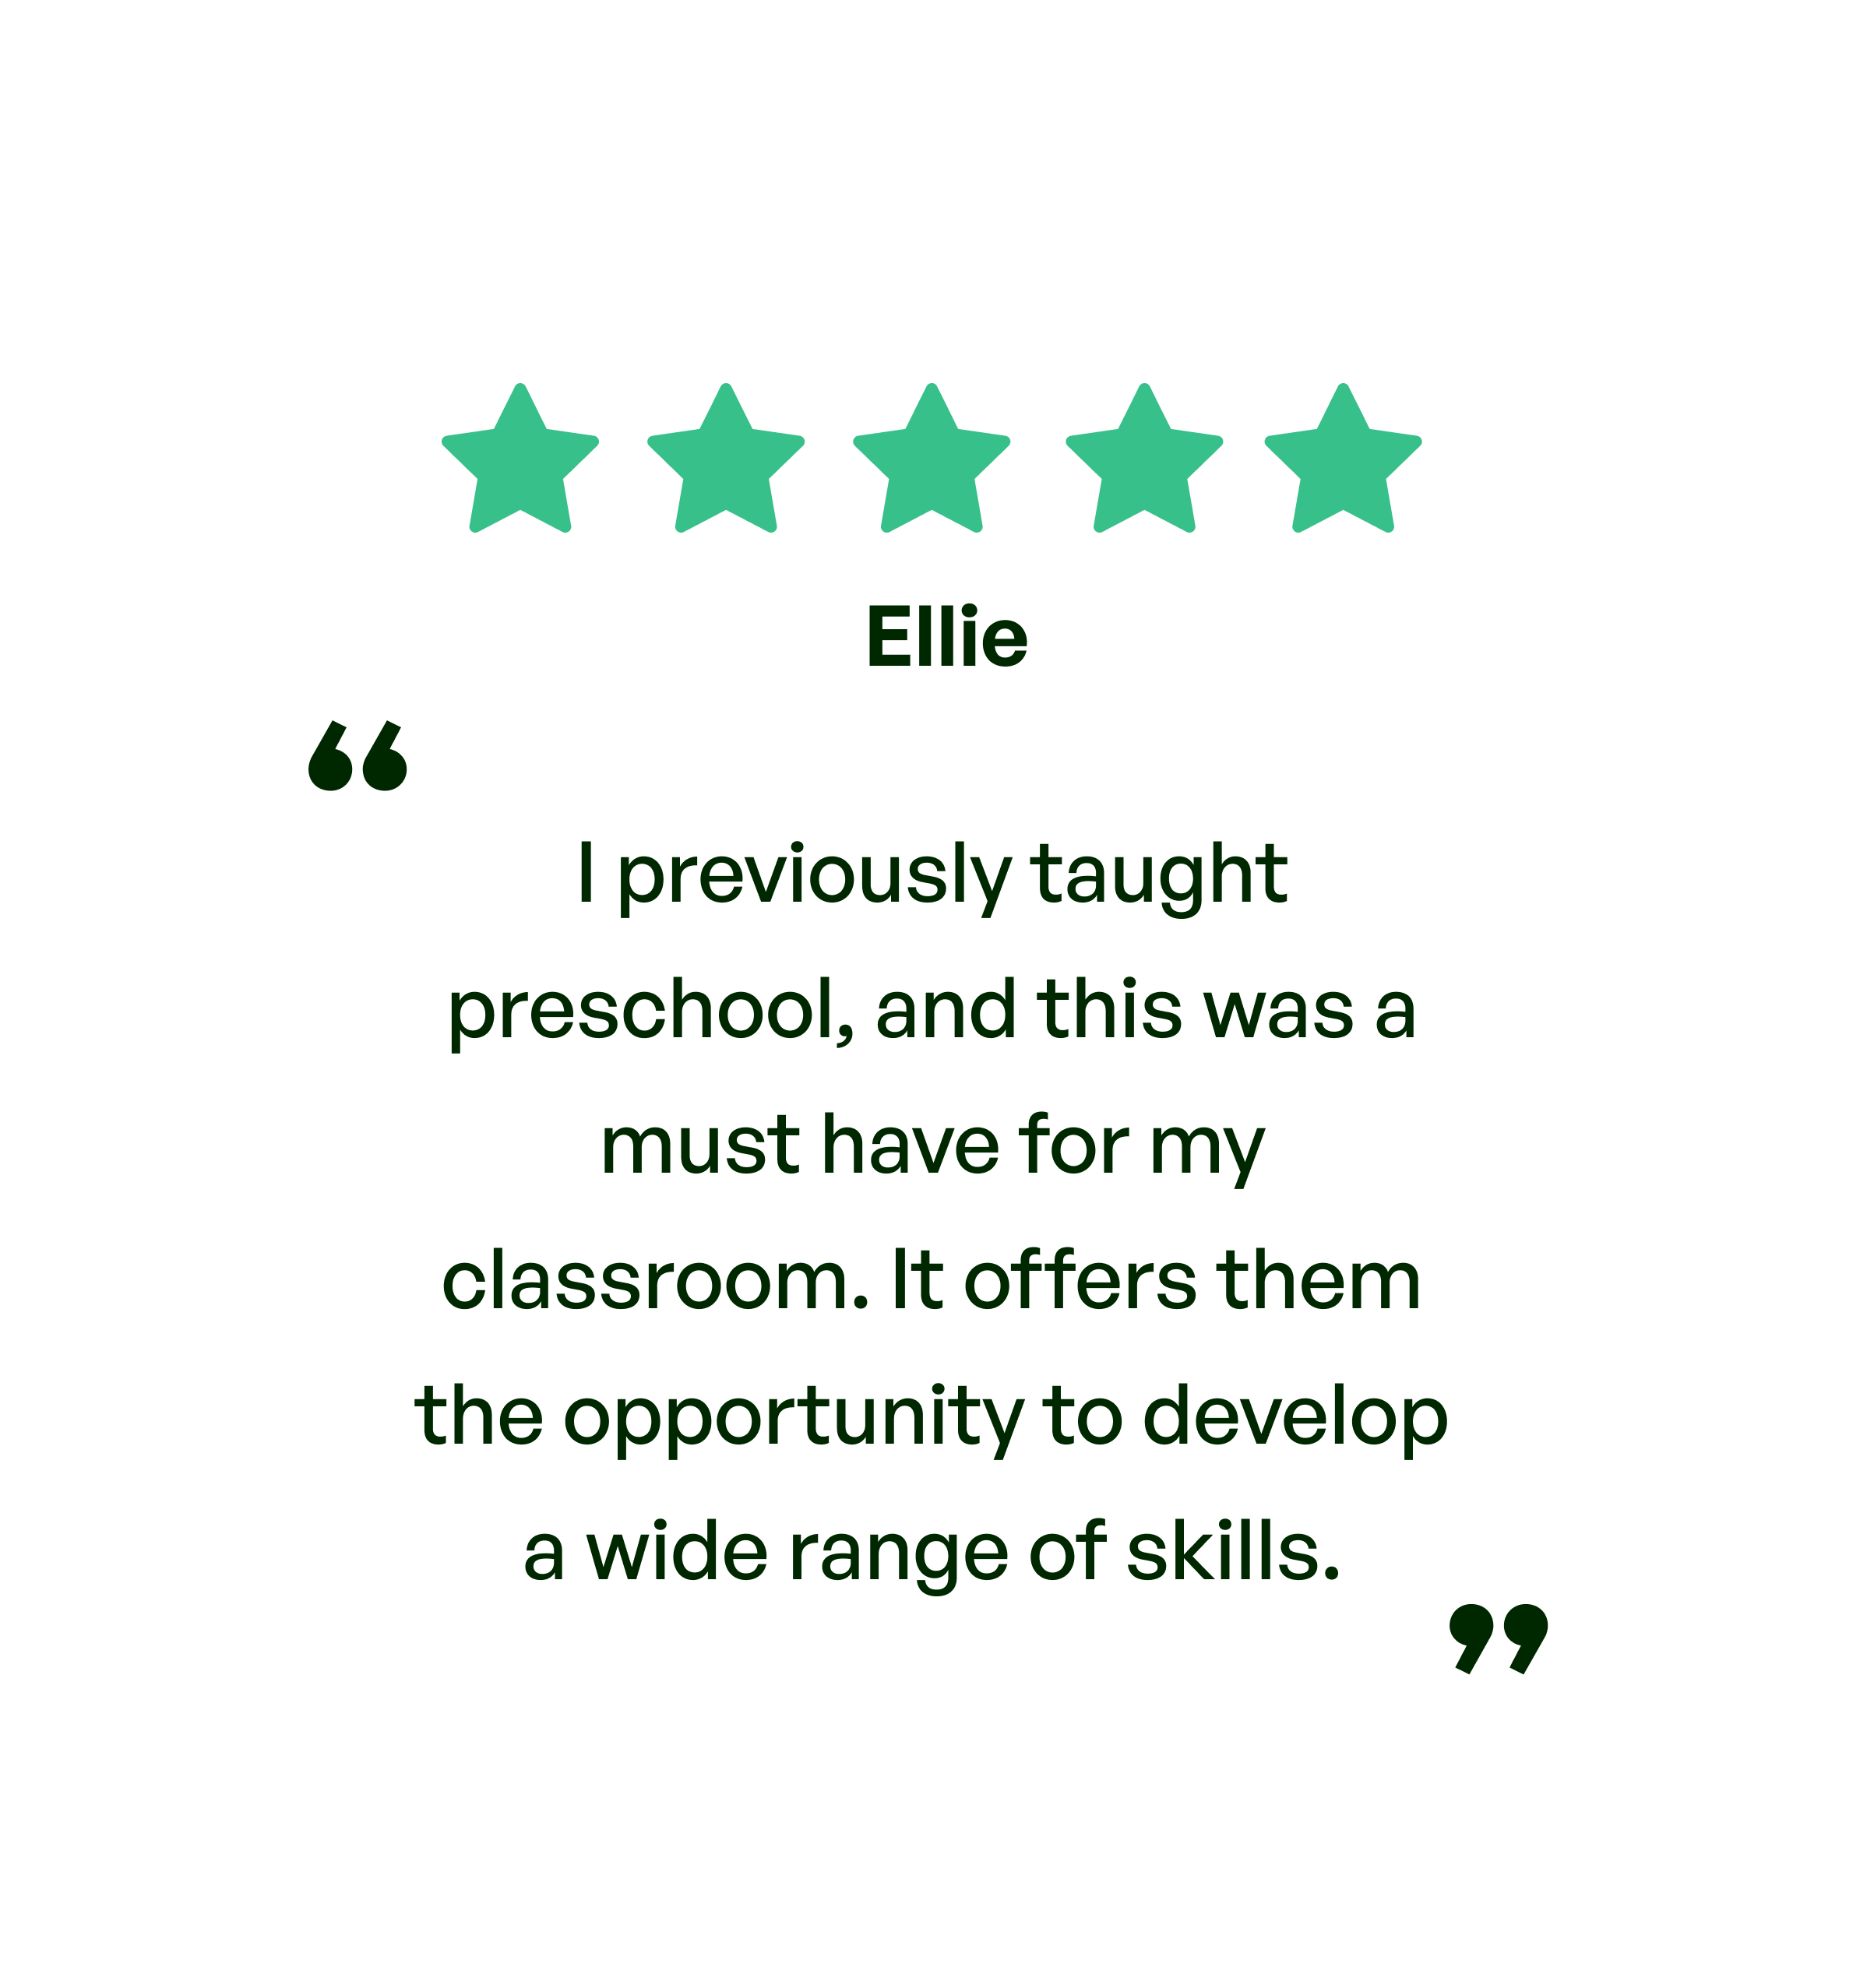 Five stars. Testimonial: I previously taught preschool and this was a must have for my classroom. It offers them the opportunity to develop a wide range of skills. From Ellie